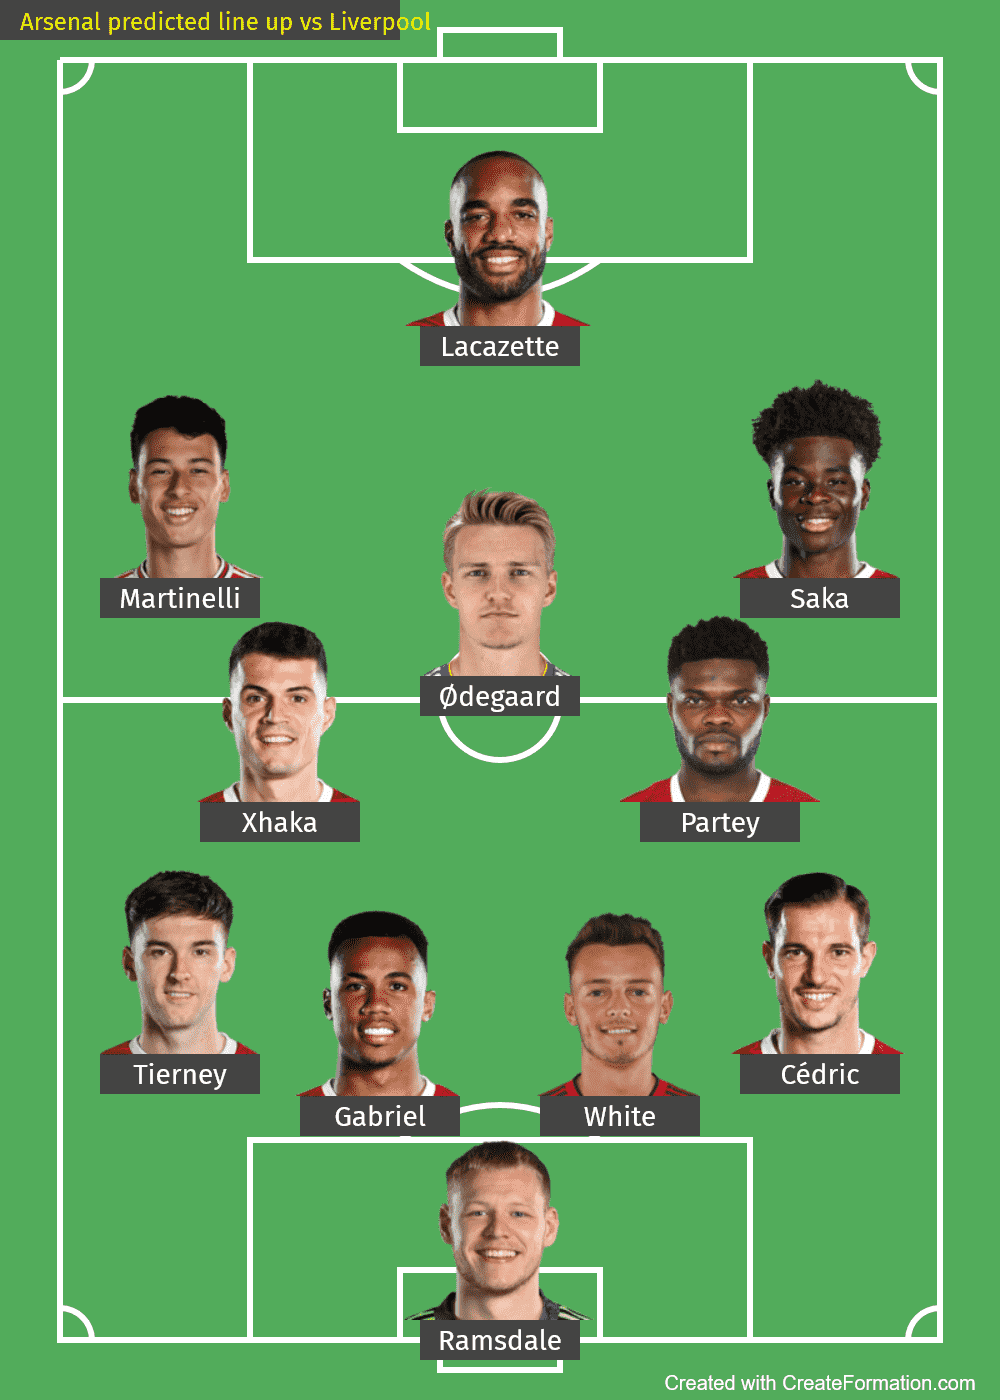 Arsenal predicted line up vs Liverpool-2022-EPL